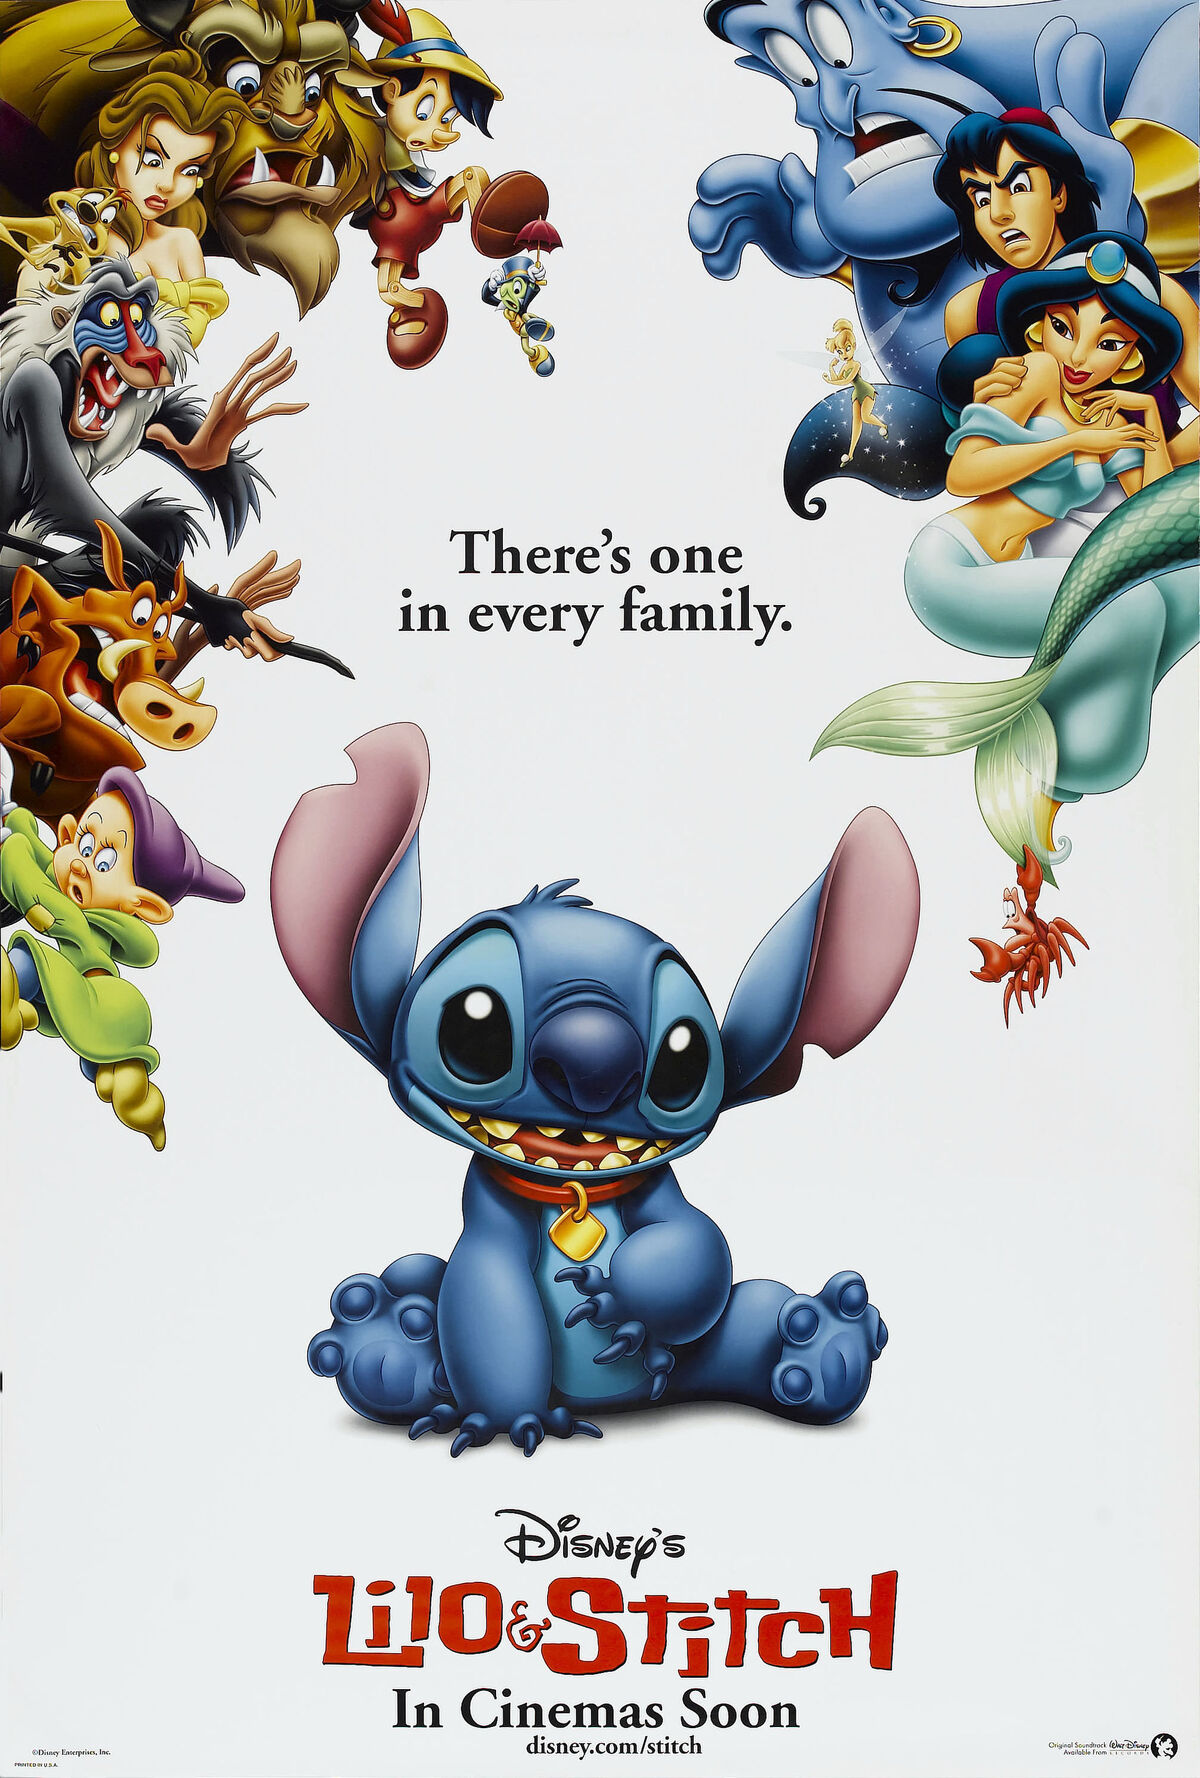 Fans Outraged as Disney Cuts Iconic Character From 'Lilo & Stitch' Remake -  Inside the Magic